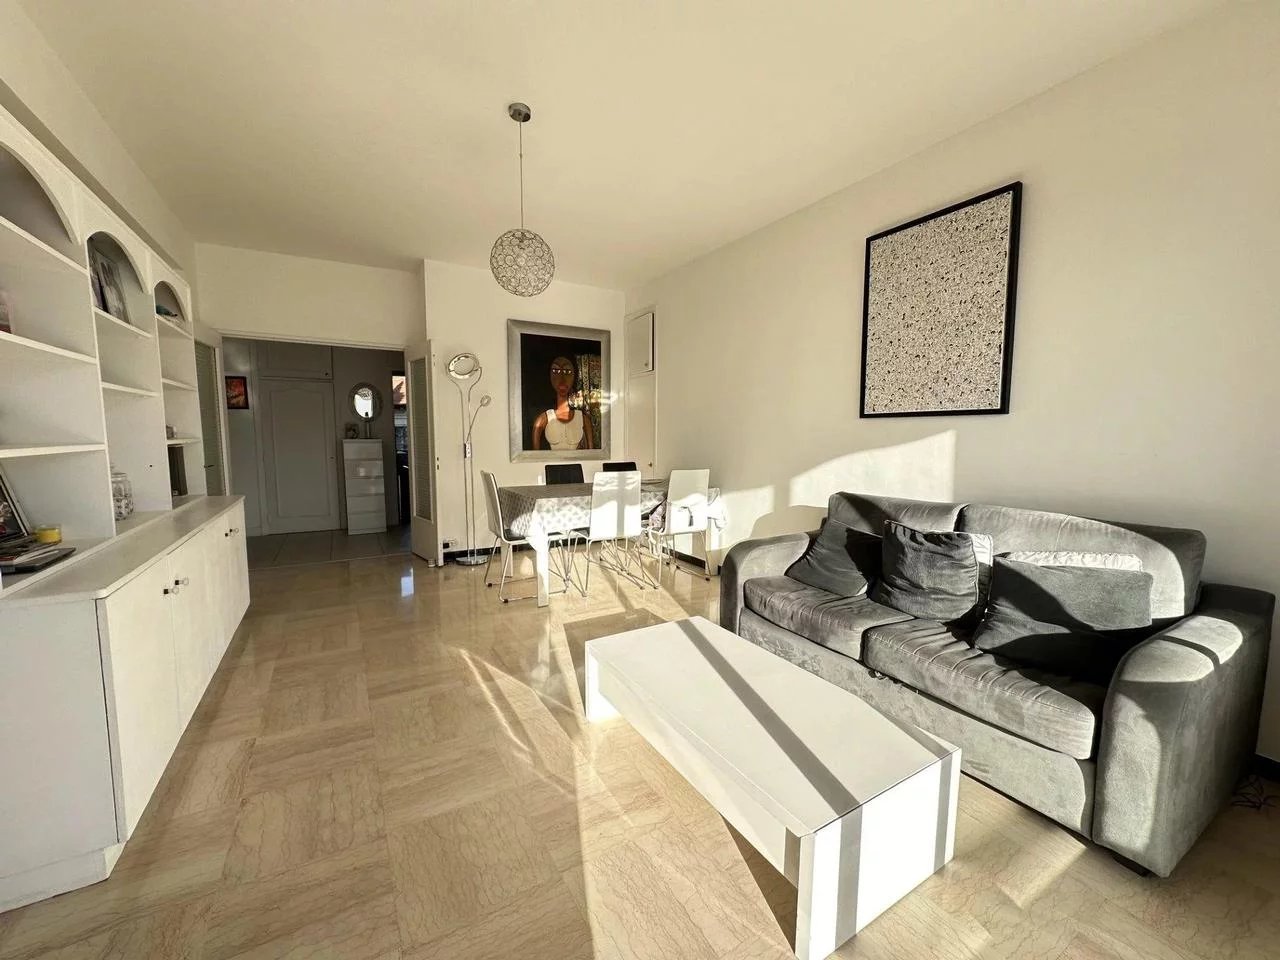 Appartement  3 Rooms 75.08m2  for sale   474 000 €